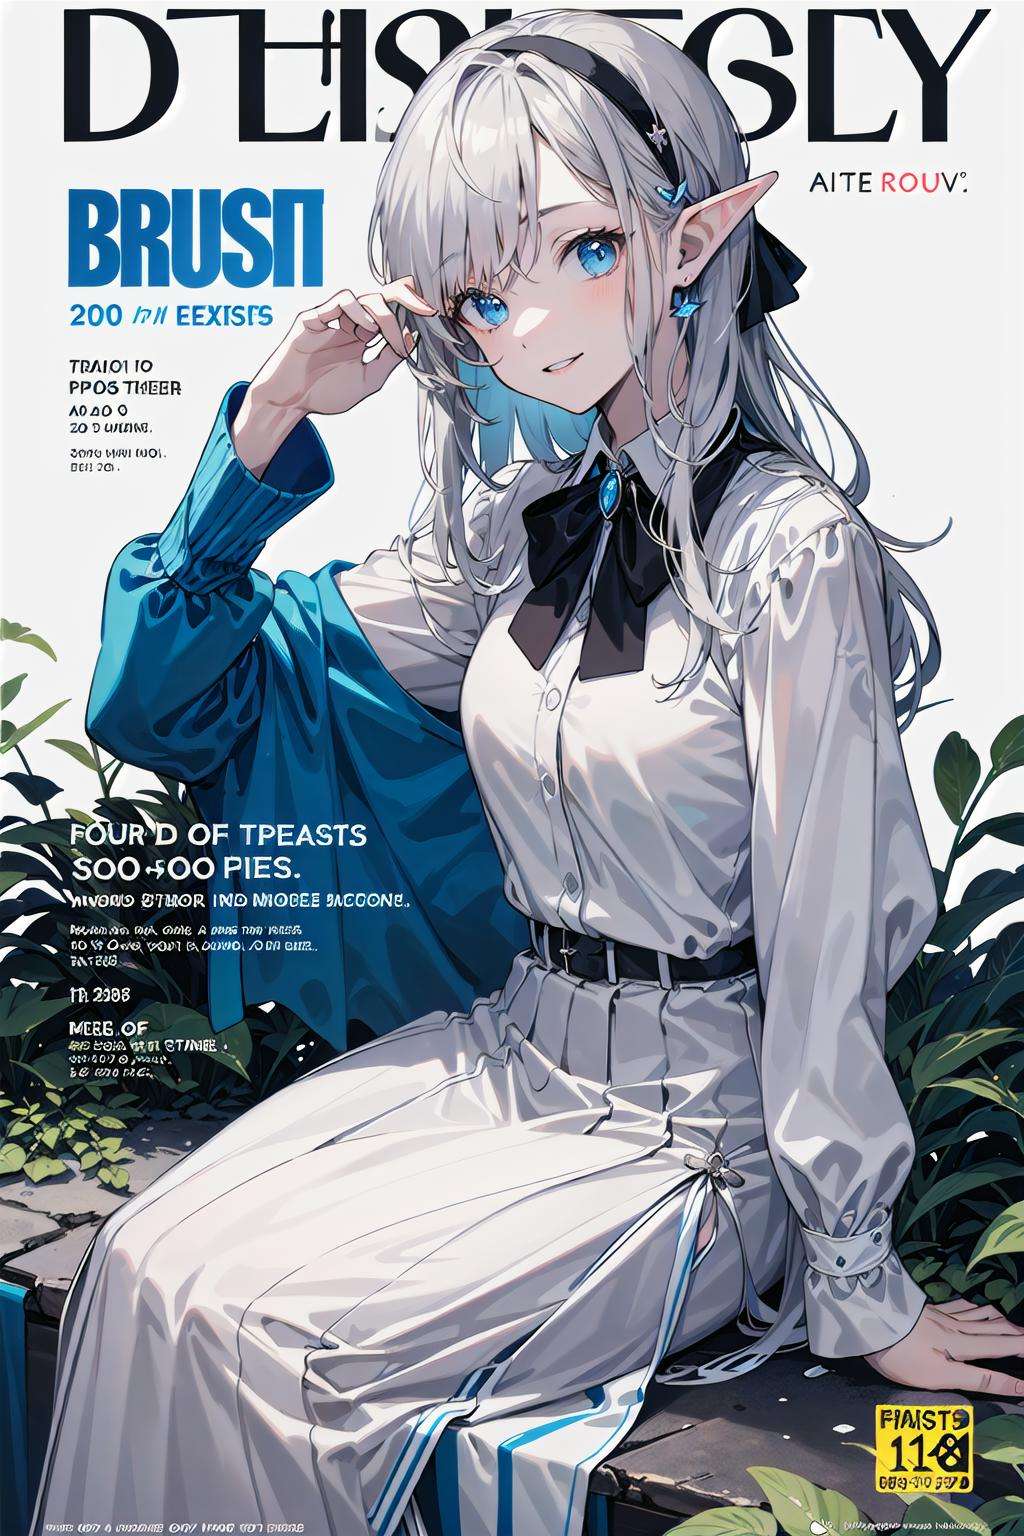 ((masterpiece)), expressionless, (((best quality))), ((illustration)),1girl, elf, ((solo)), (detailed face), (beautiful detailed eyes), light eyes, blue eyes, ((disheveled hair)), silver hair, full body,smile, blank stare, sitting, ((looking to the side)),bow tie hair band, white transparent long skirt, noble, mysterious,bright background, in forest, nature, sunshines through the leaves, butterfly, river, close-up,(magazine:1.3), (cover-style:1.3), fashionable, woman, vibrant, outfit, posing, front, colorful, dynamic, background, elements, confident, expression, holding, statement, accessory, majestic, coiled, around, touch, scene, text, cover, bold, attention-grabbing, title, stylish, font, catchy, headline, larger, striking, modern, trendy, focus, fashion,